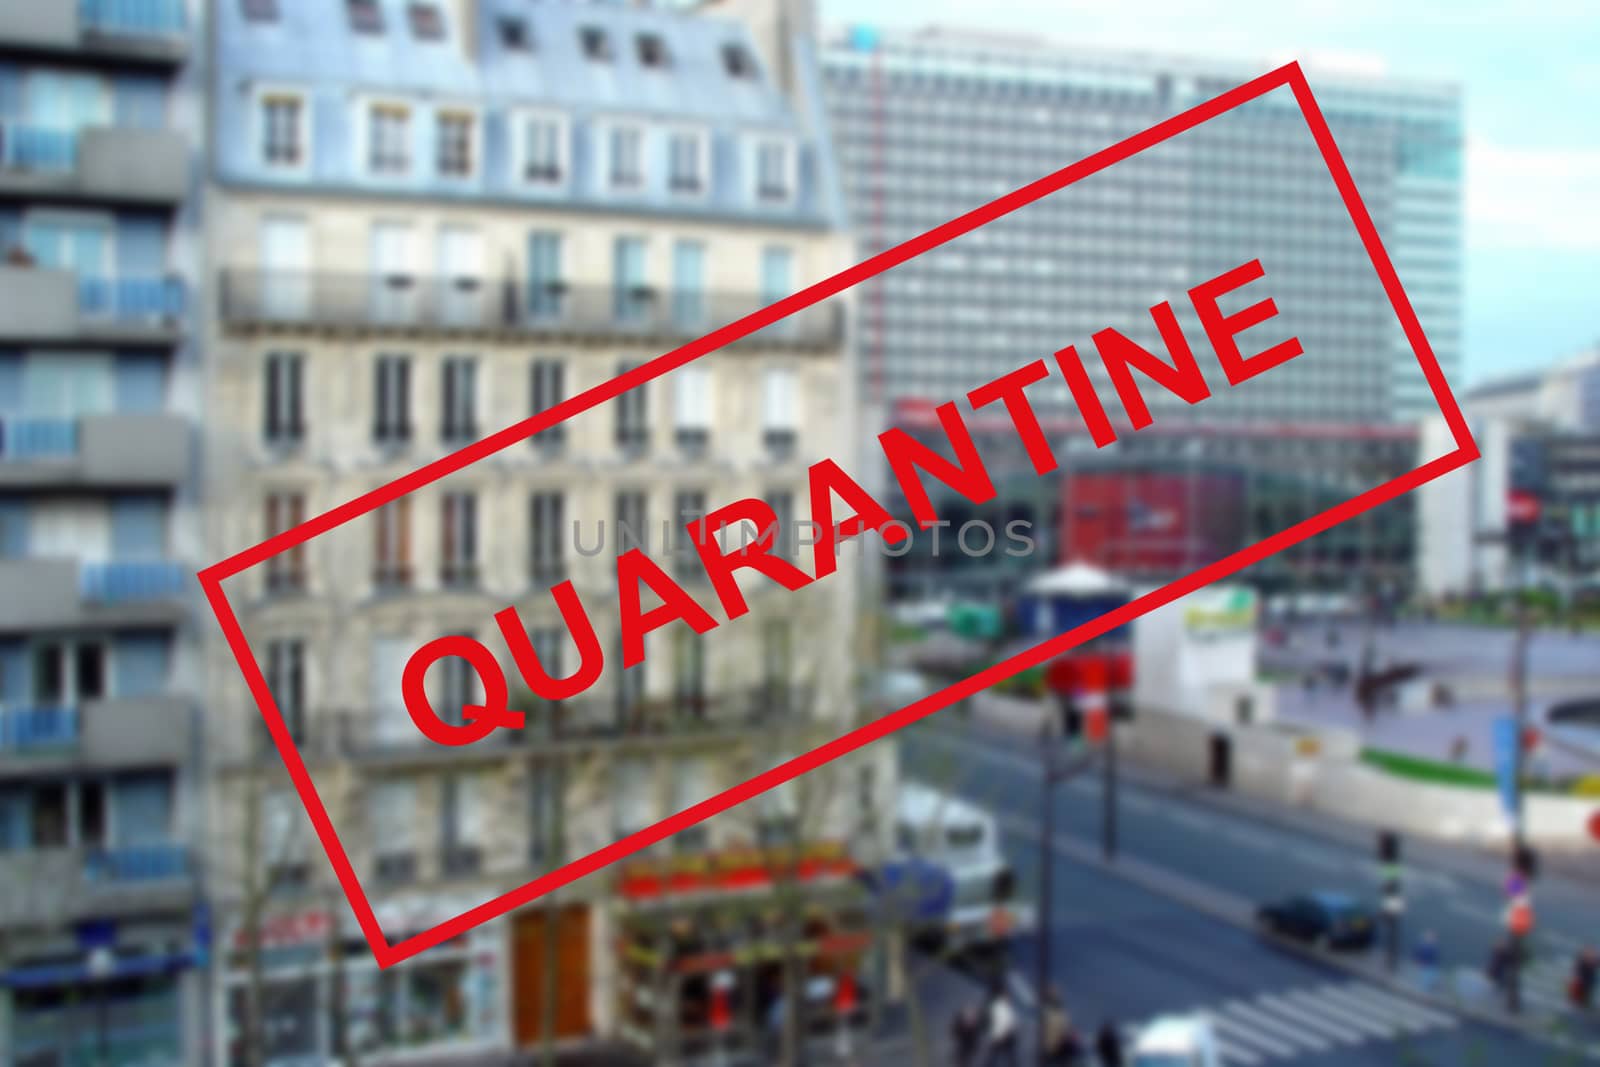 COVID-19 coronavirus in France, text Quarantine in photo of a train station building in Paris. by bonilook